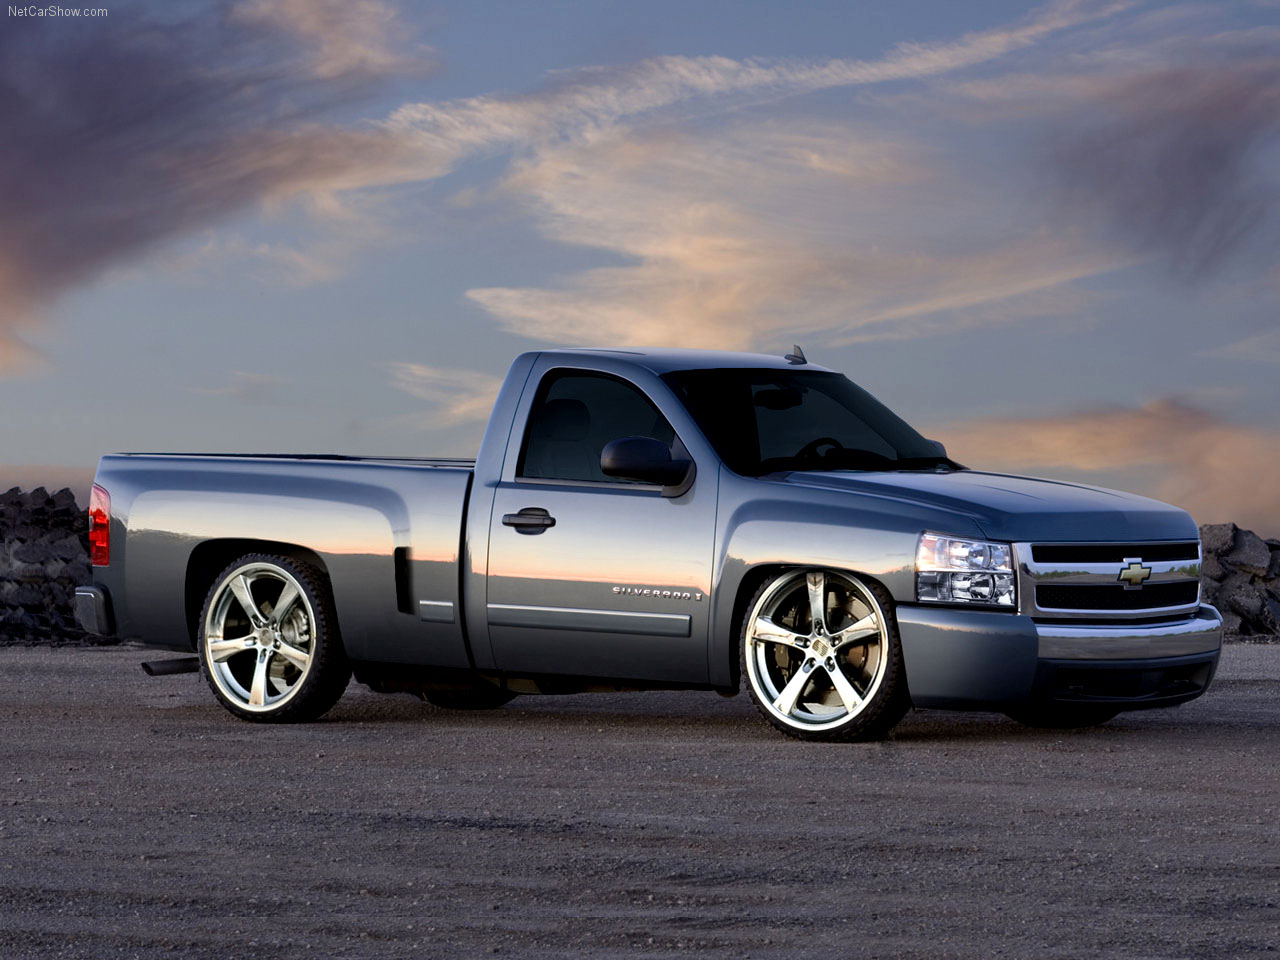 Chevy Truck Wallpapers 6625 Hd Wallpapers in Cars   Imagescicom